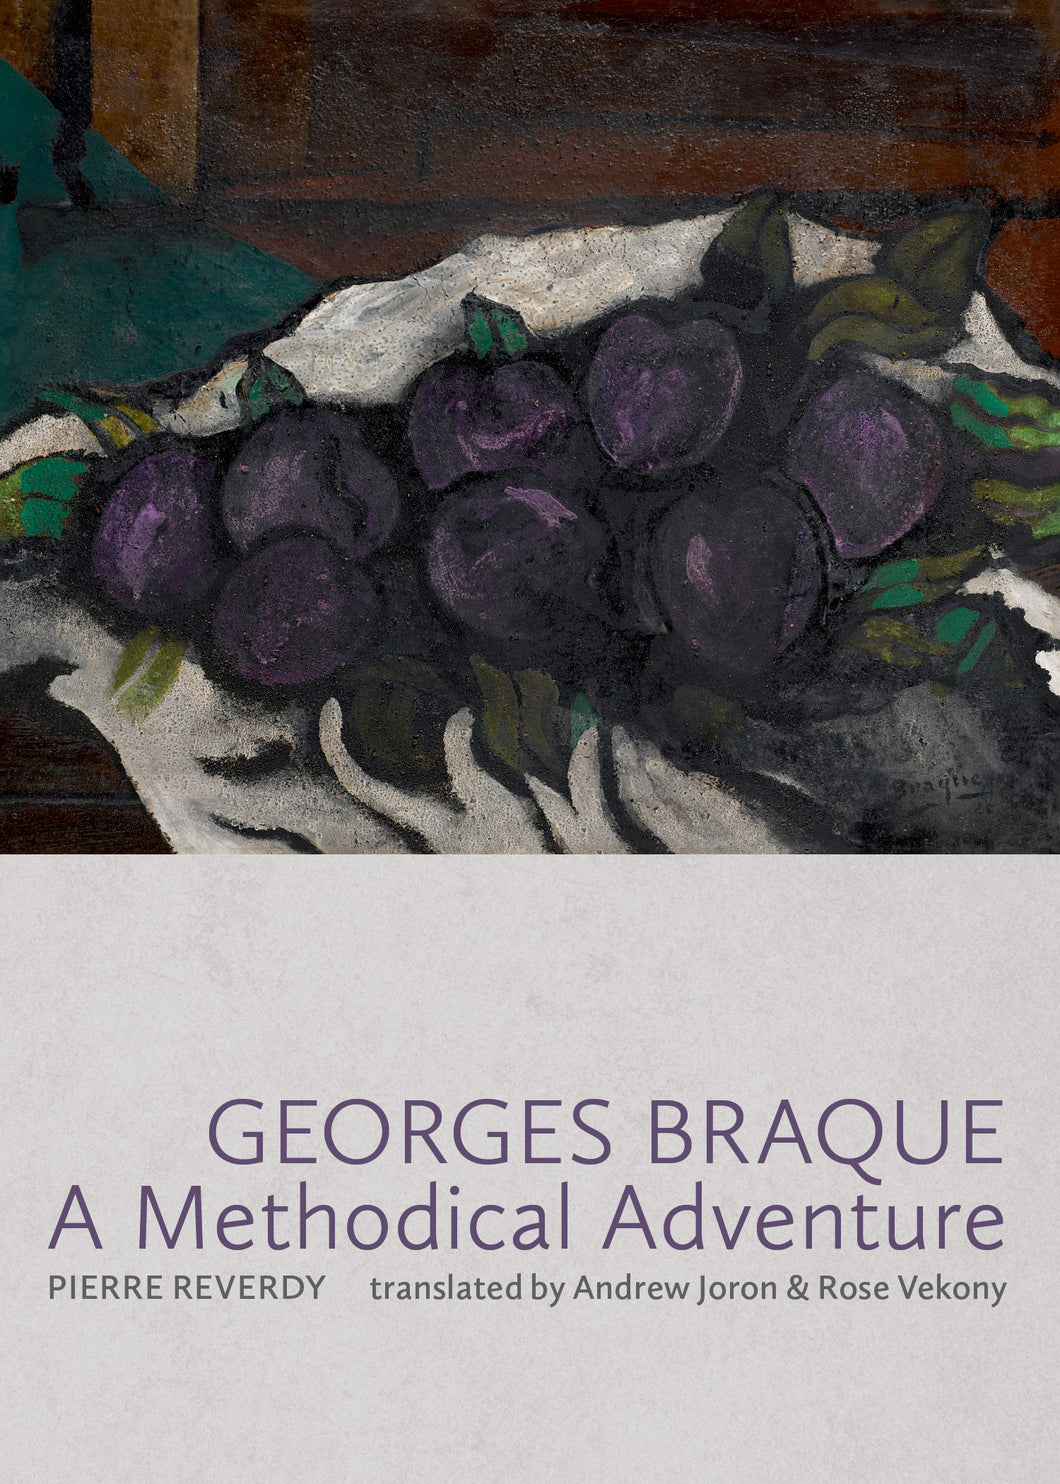 Reverdy, Pierre: Georges Braque: A Methodical Adventure